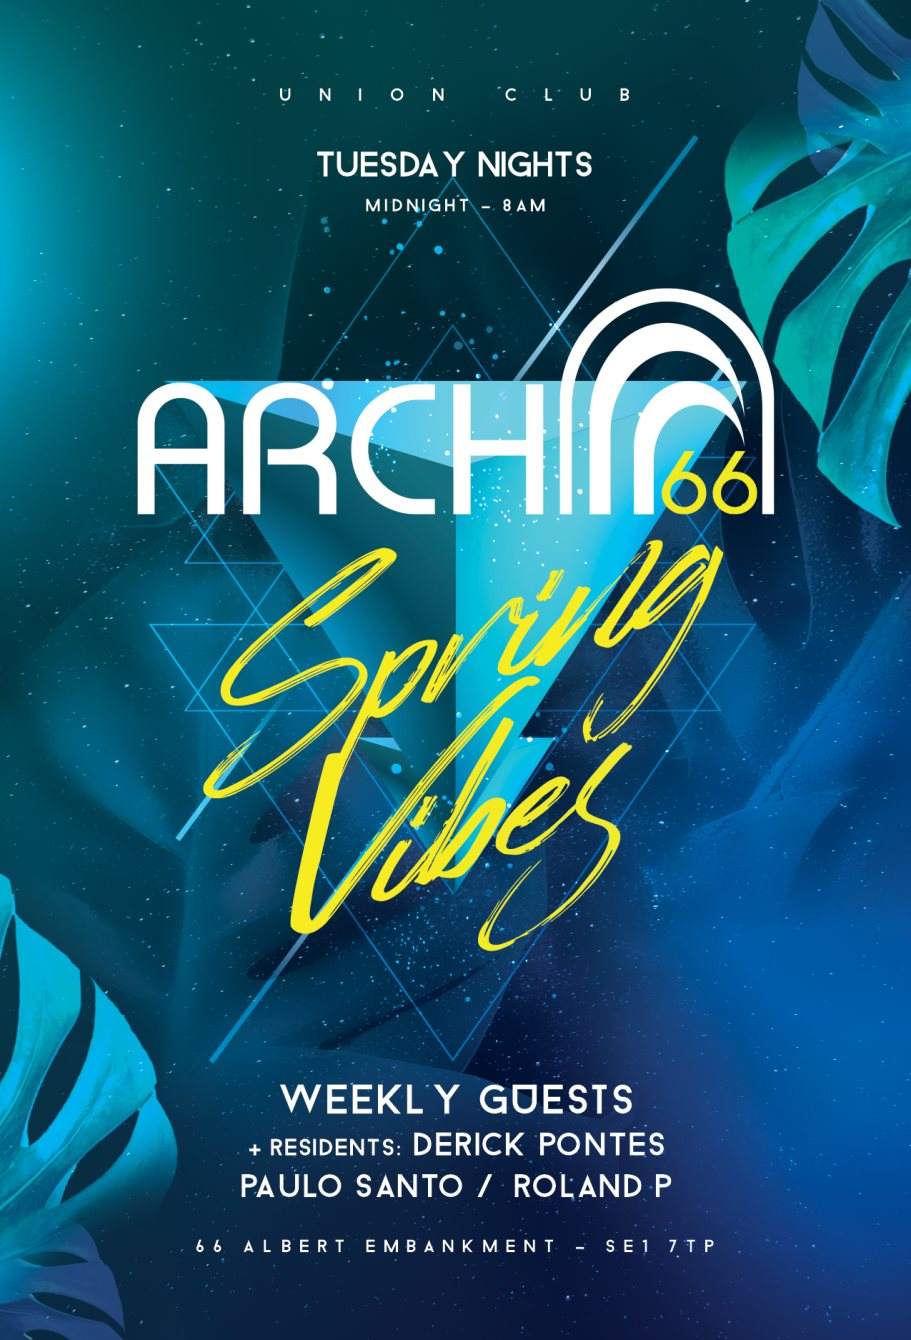 ARCH66 - Tuesday Night Afterhours (House - Disco - Techhouse) - フライヤー表